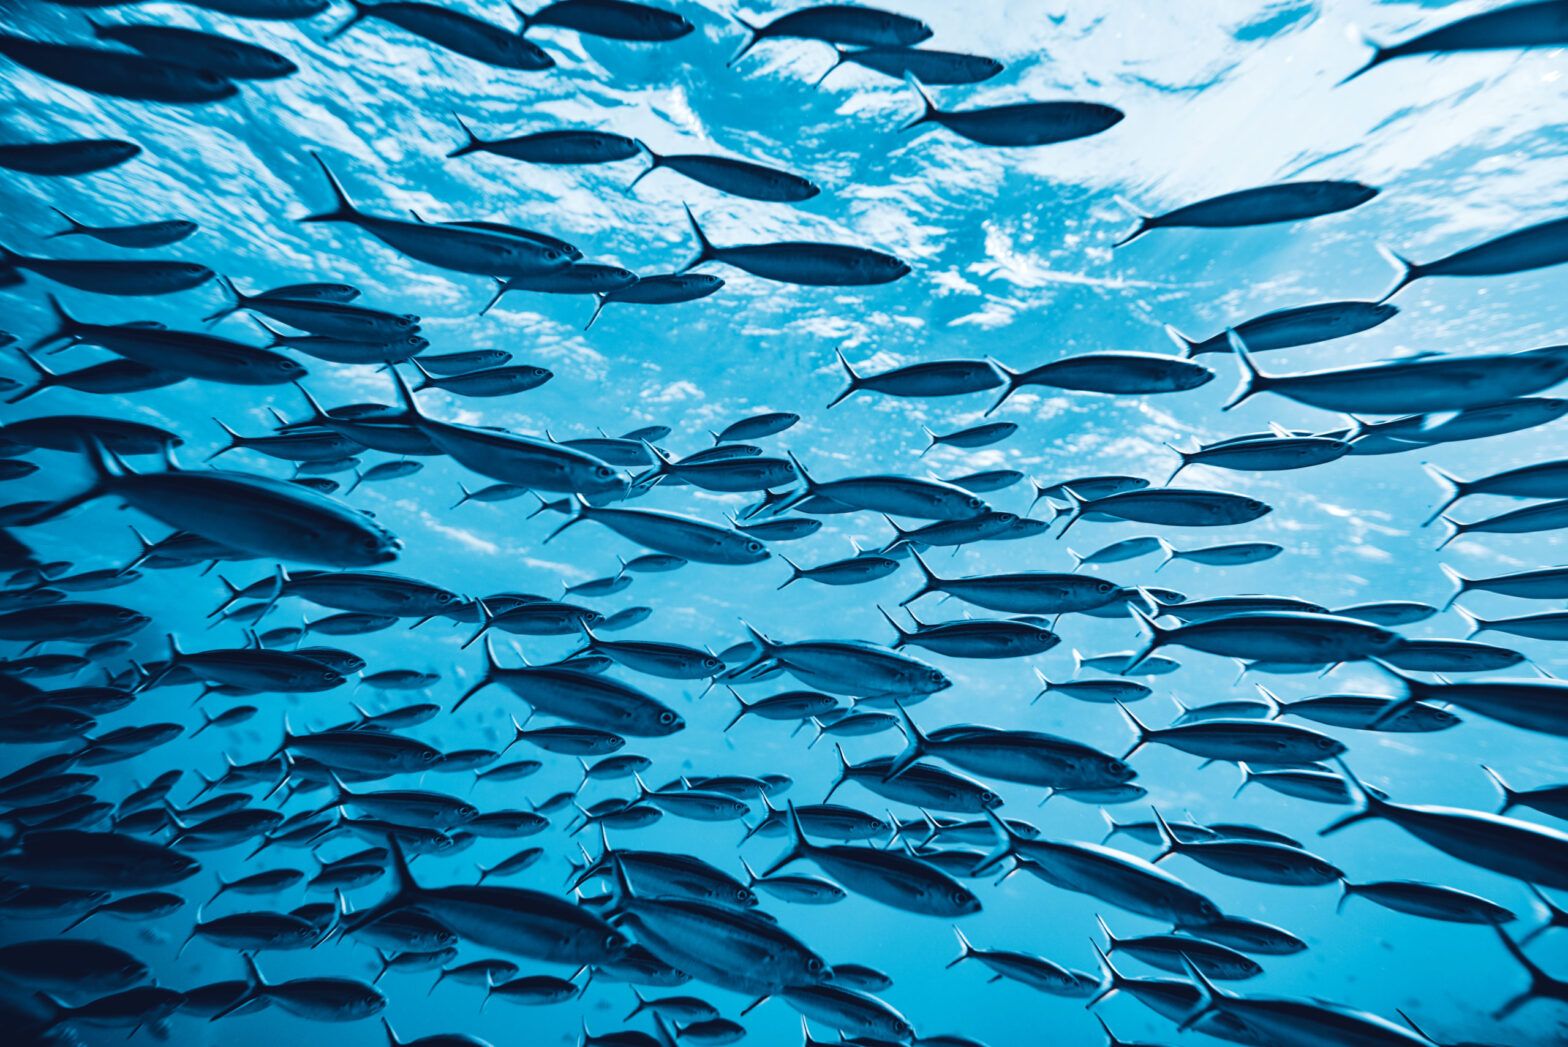 Blue bond could help replenish ocean fish stocks by 2040